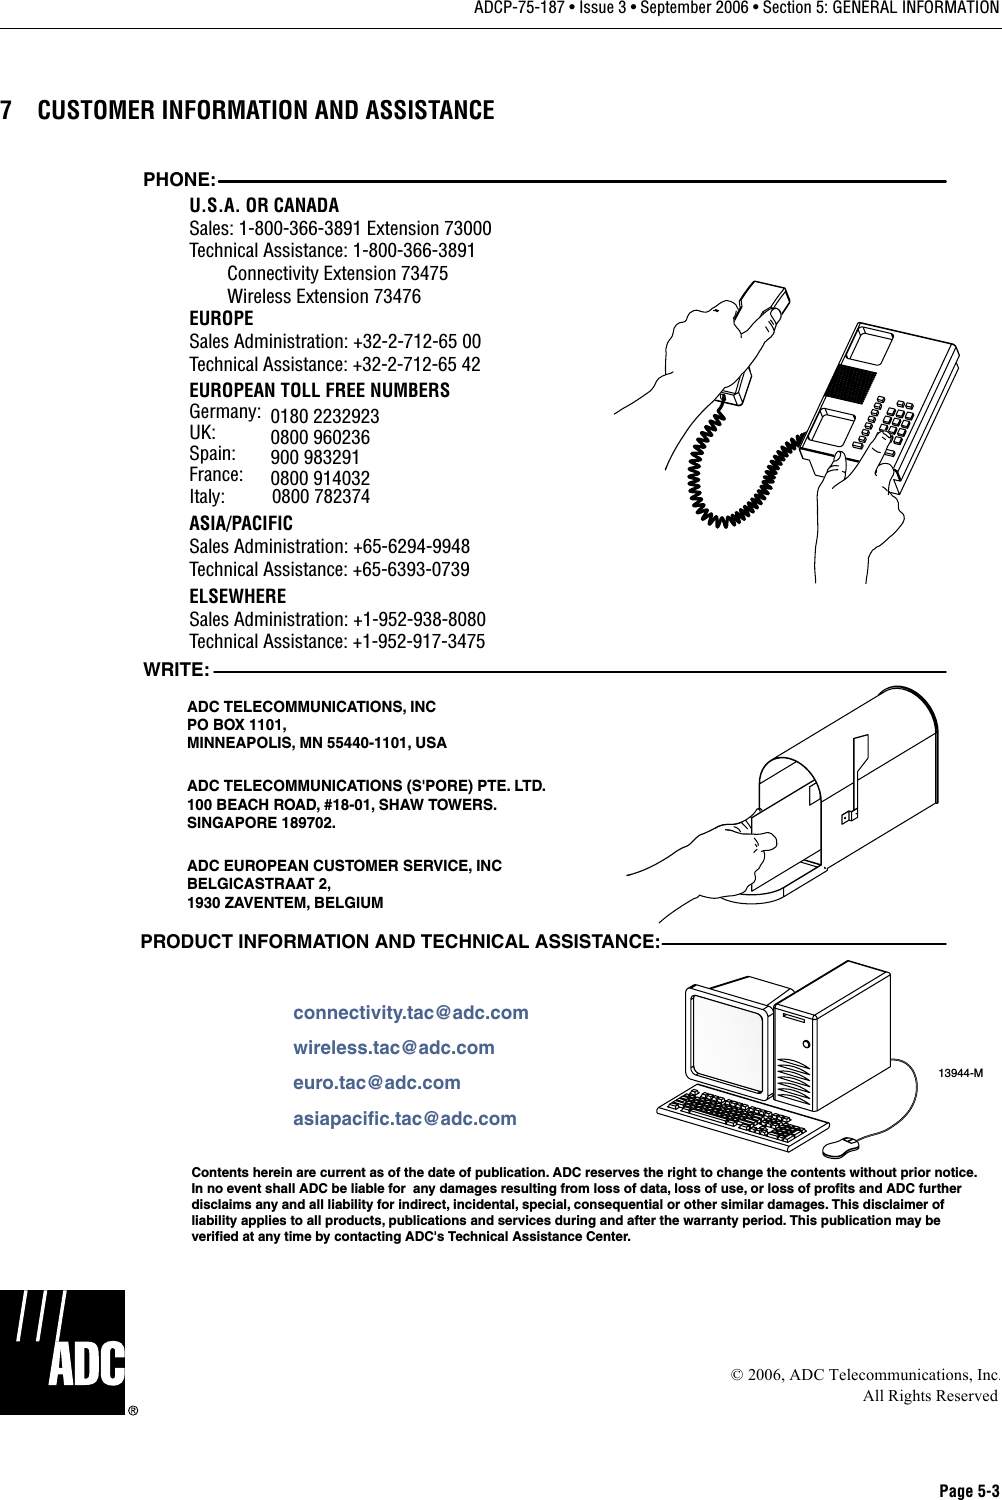 Page 5-3ADCP-75-187 • Issue 3 • September 2006 • Section 5: GENERAL INFORMATION7 CUSTOMER INFORMATION AND ASSISTANCE© 2006, ADC Telecommunications, Inc.All Rights Reserved13944-MWRITE:ADC TELECOMMUNICATIONS, INCPO BOX 1101,MINNEAPOLIS, MN 55440-1101, USAADC TELECOMMUNICATIONS (S&apos;PORE) PTE. LTD.100 BEACH ROAD, #18-01, SHAW TOWERS.SINGAPORE 189702.ADC EUROPEAN CUSTOMER SERVICE, INCBELGICASTRAAT 2,1930 ZAVENTEM, BELGIUMPHONE:EUROPESales Administration: +32-2-712-65 00Technical Assistance: +32-2-712-65 42EUROPEAN TOLL FREE NUMBERSUK: 0800 960236Spain: 900 983291France: 0800 914032Germany: 0180 2232923U.S.A. OR CANADASales: 1-800-366-3891 Extension 73000Technical Assistance: 1-800-366-3891        Connectivity Extension 73475        Wireless Extension 73476ASIA/PACIFICSales Administration: +65-6294-9948Technical Assistance: +65-6393-0739ELSEWHERESales Administration: +1-952-938-8080Technical Assistance: +1-952-917-3475Italy:          0800 782374PRODUCT INFORMATION AND TECHNICAL ASSISTANCE:Contents herein are current as of the date of publication. ADC reserves the right to change the contents without prior notice.In no event shall ADC be liable for  any damages resulting from loss of data, loss of use, or loss of profits and ADC furtherdisclaims any and all liability for indirect, incidental, special, consequential or other similar damages. This disclaimer ofliability applies to all products, publications and services during and after the warranty period. This publication may beverified at any time by contacting ADC&apos;s Technical Assistance Center. euro.tac@adc.comasiapacific.tac@adc.comwireless.tac@adc.comconnectivity.tac@adc.com